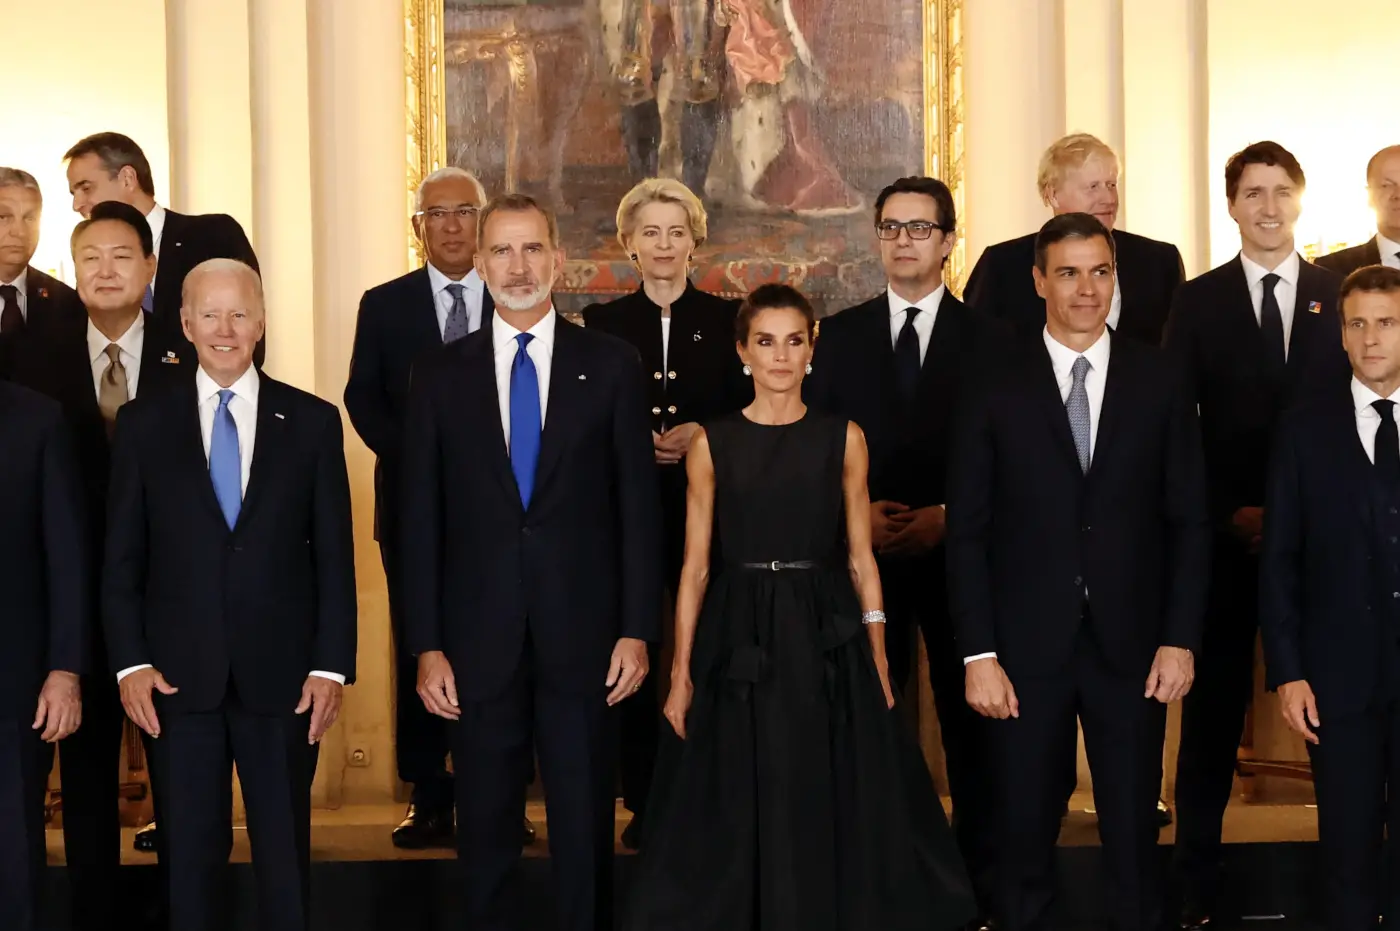 Queen Letizia wore black 2nd Skin Co dress to welcome Nato leaders at Palace